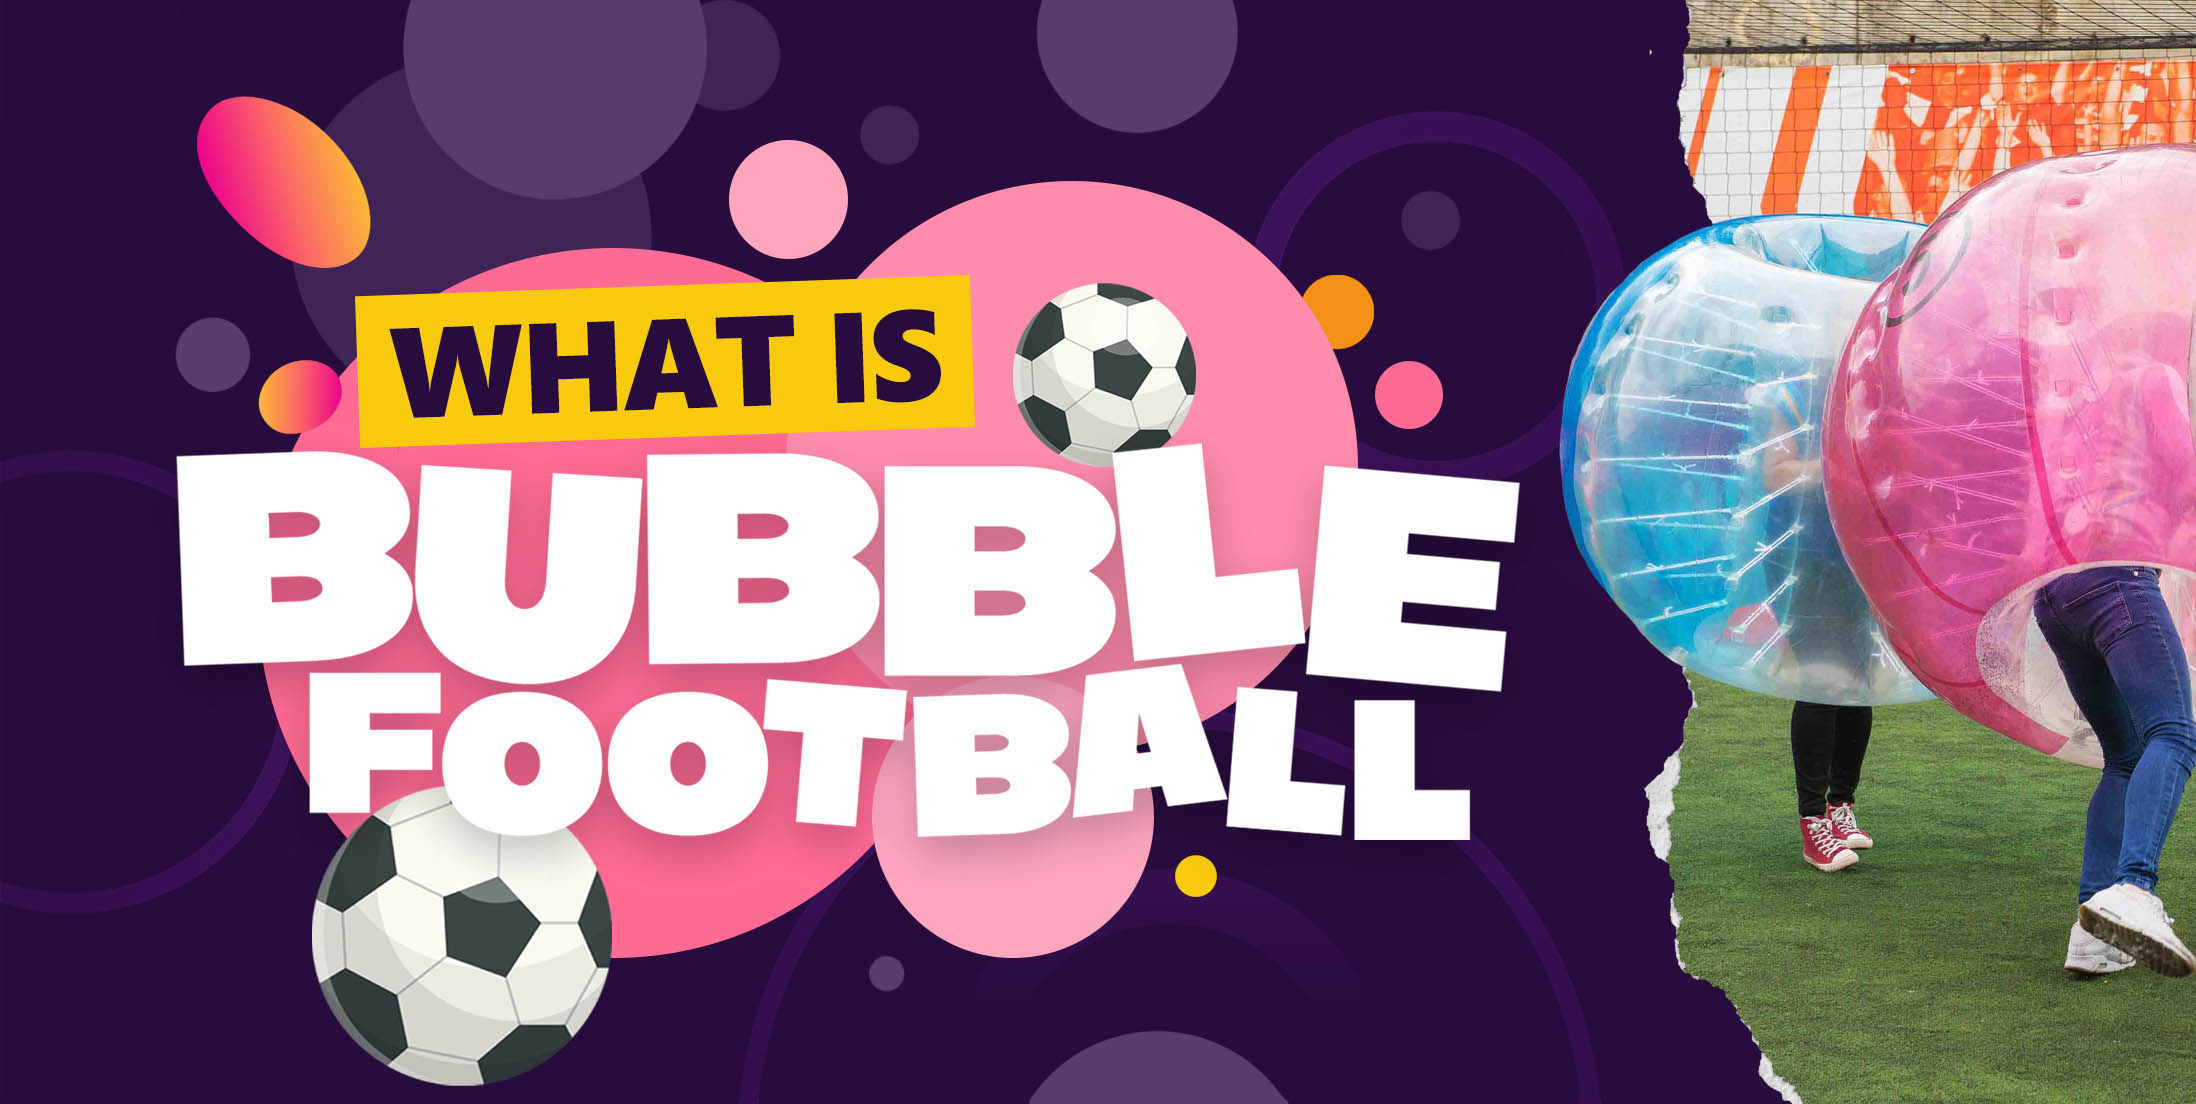 What is Bubble Football?